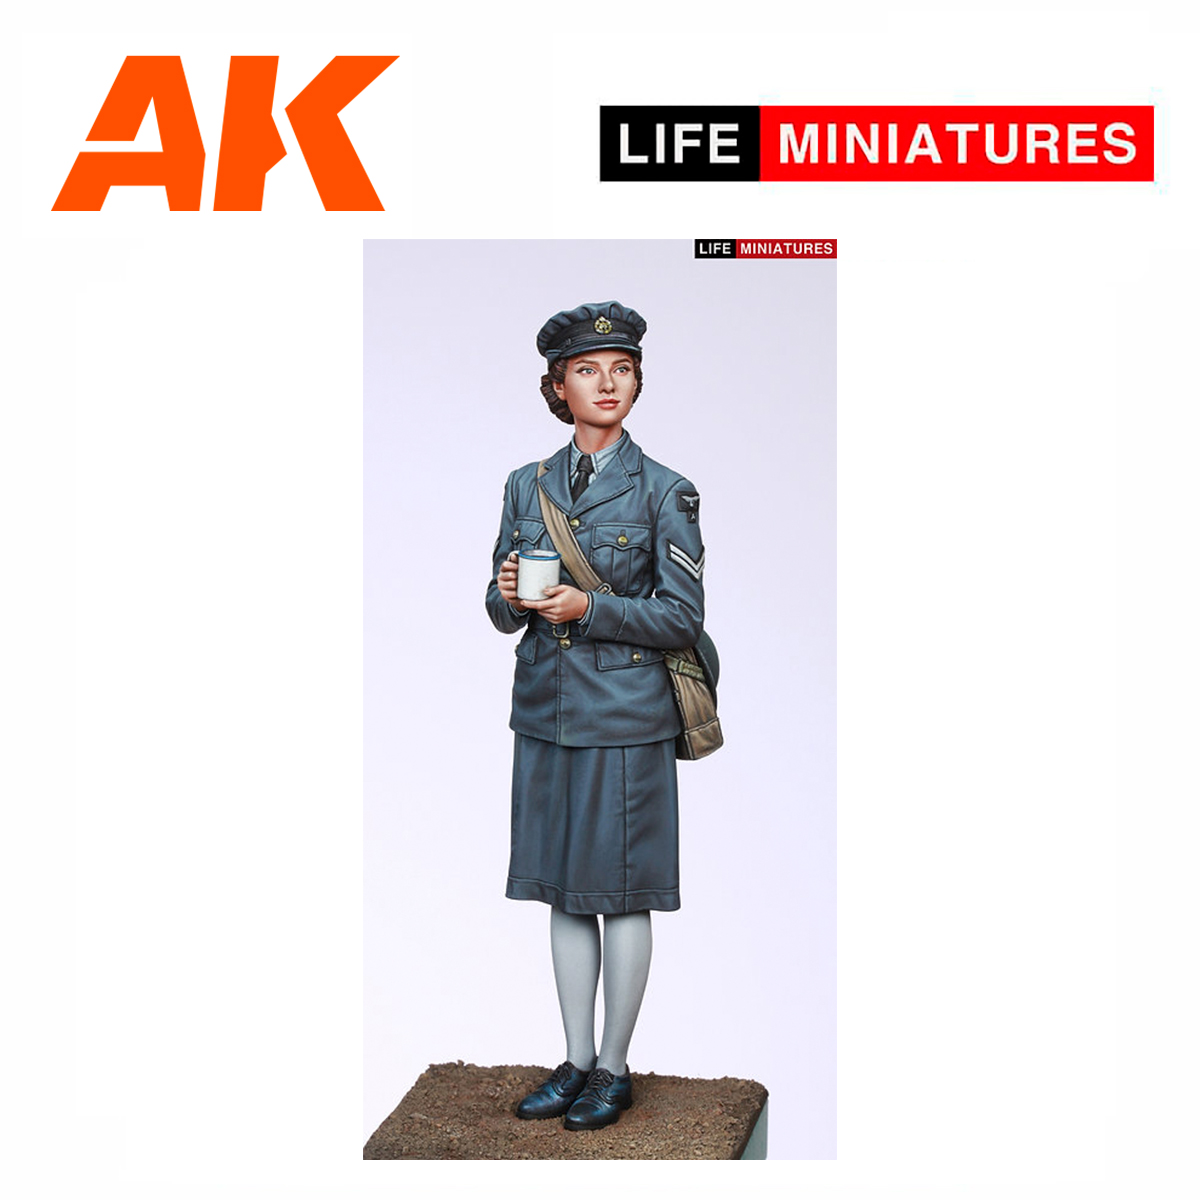 Life Miniatures – WAAF Assistant Section Leader 1940-1941 1/35